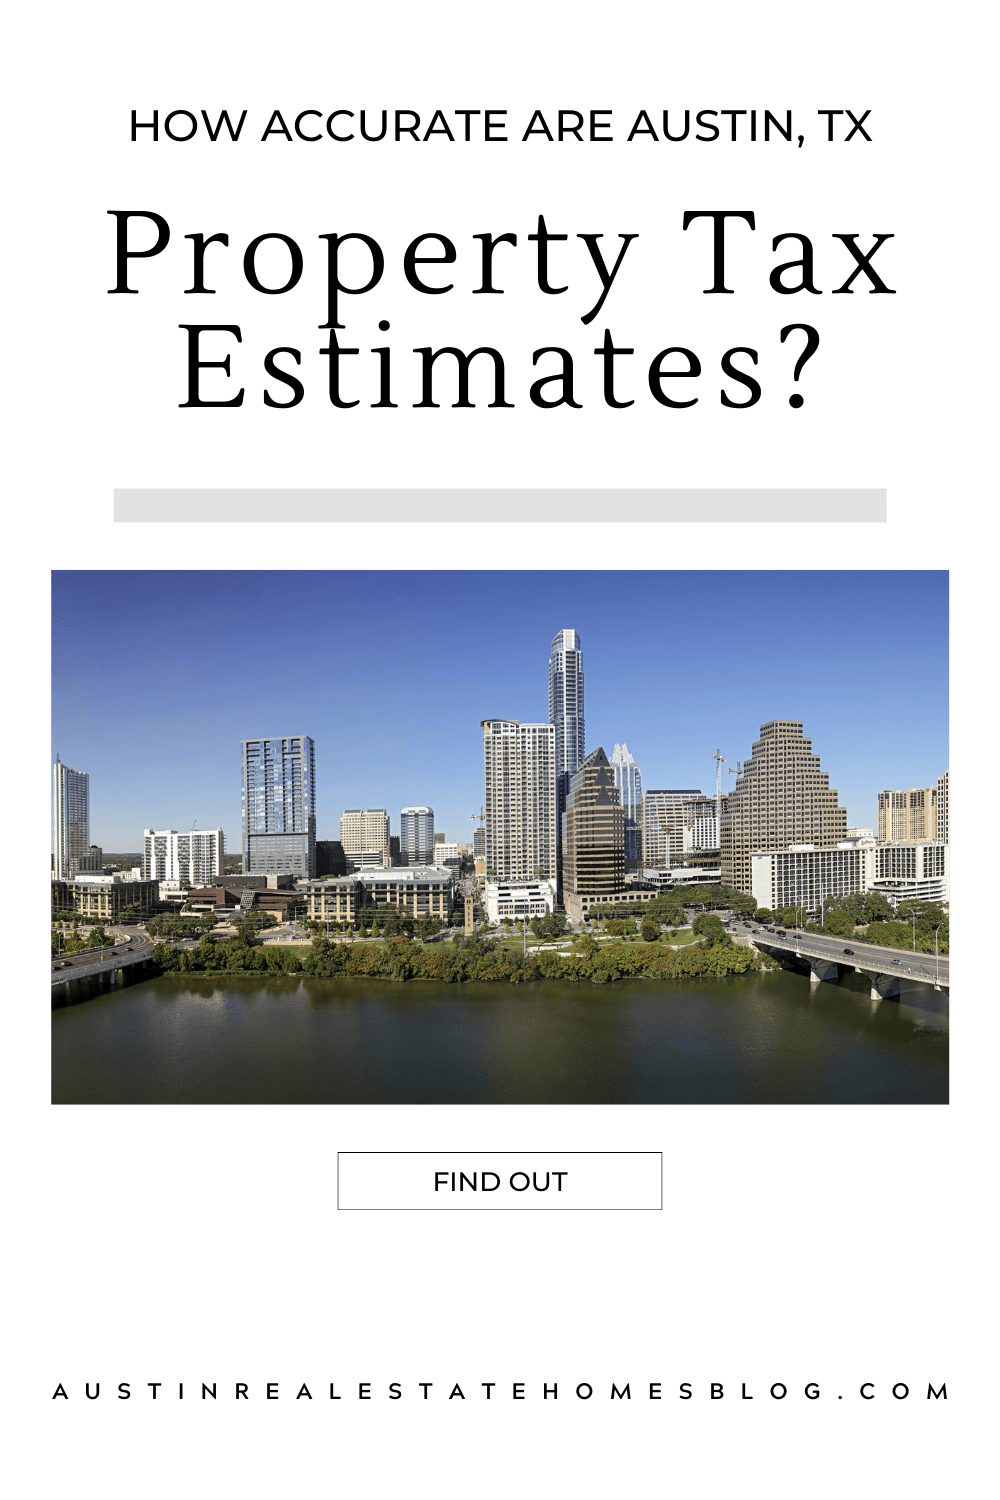 how accurate are Austin TX property tax estimates